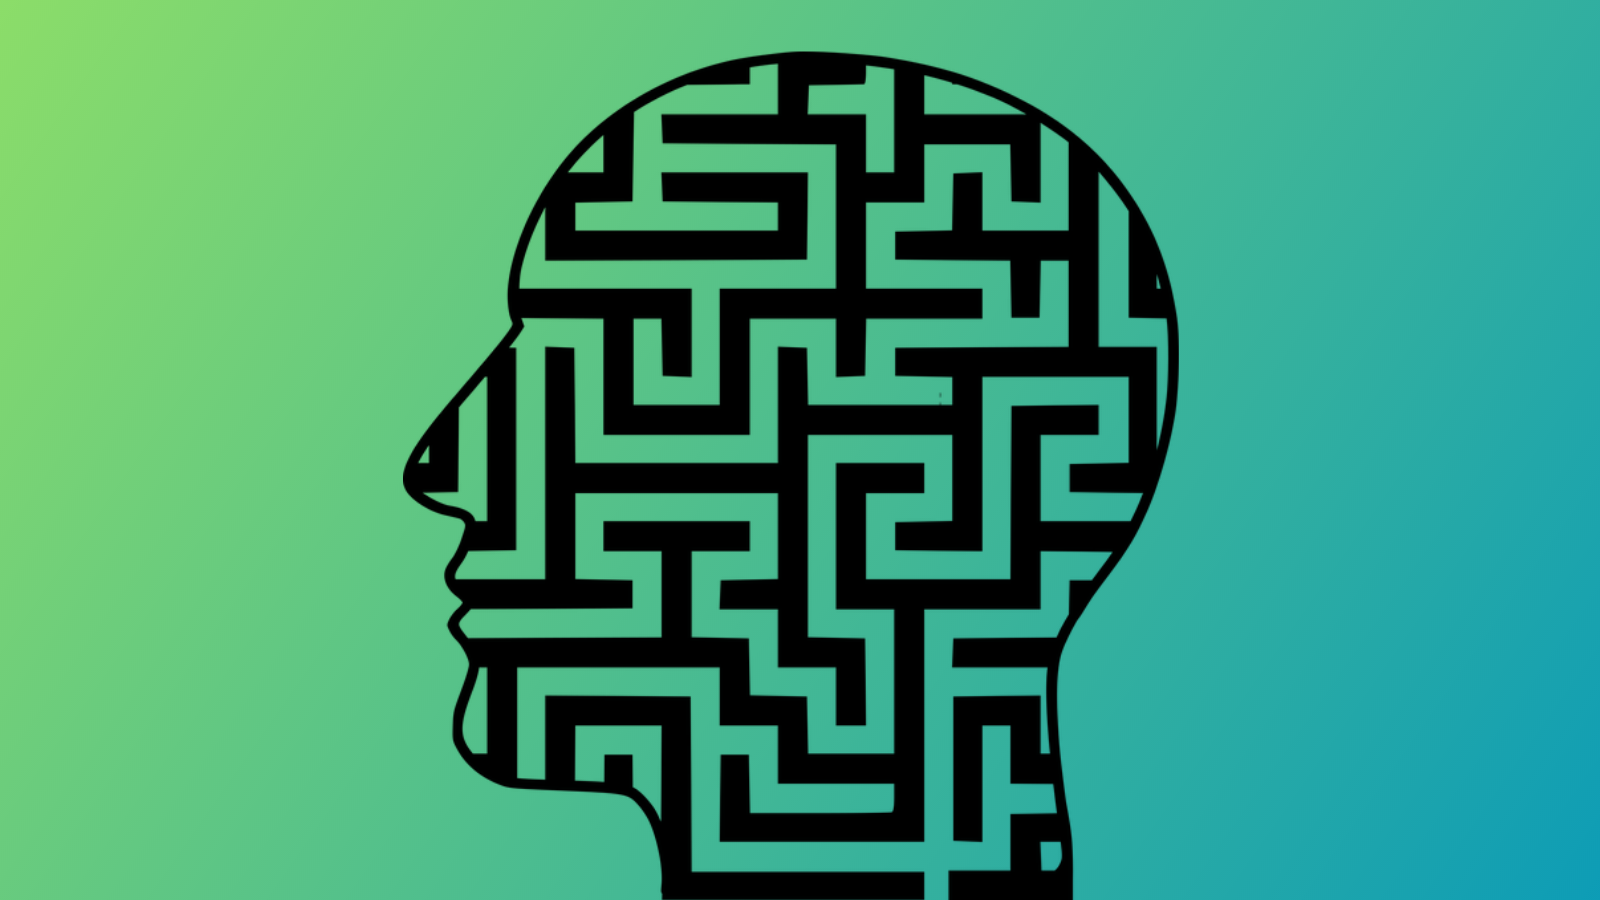 Image of a head on a green background, with a graphic of a maze overlaid through it. 